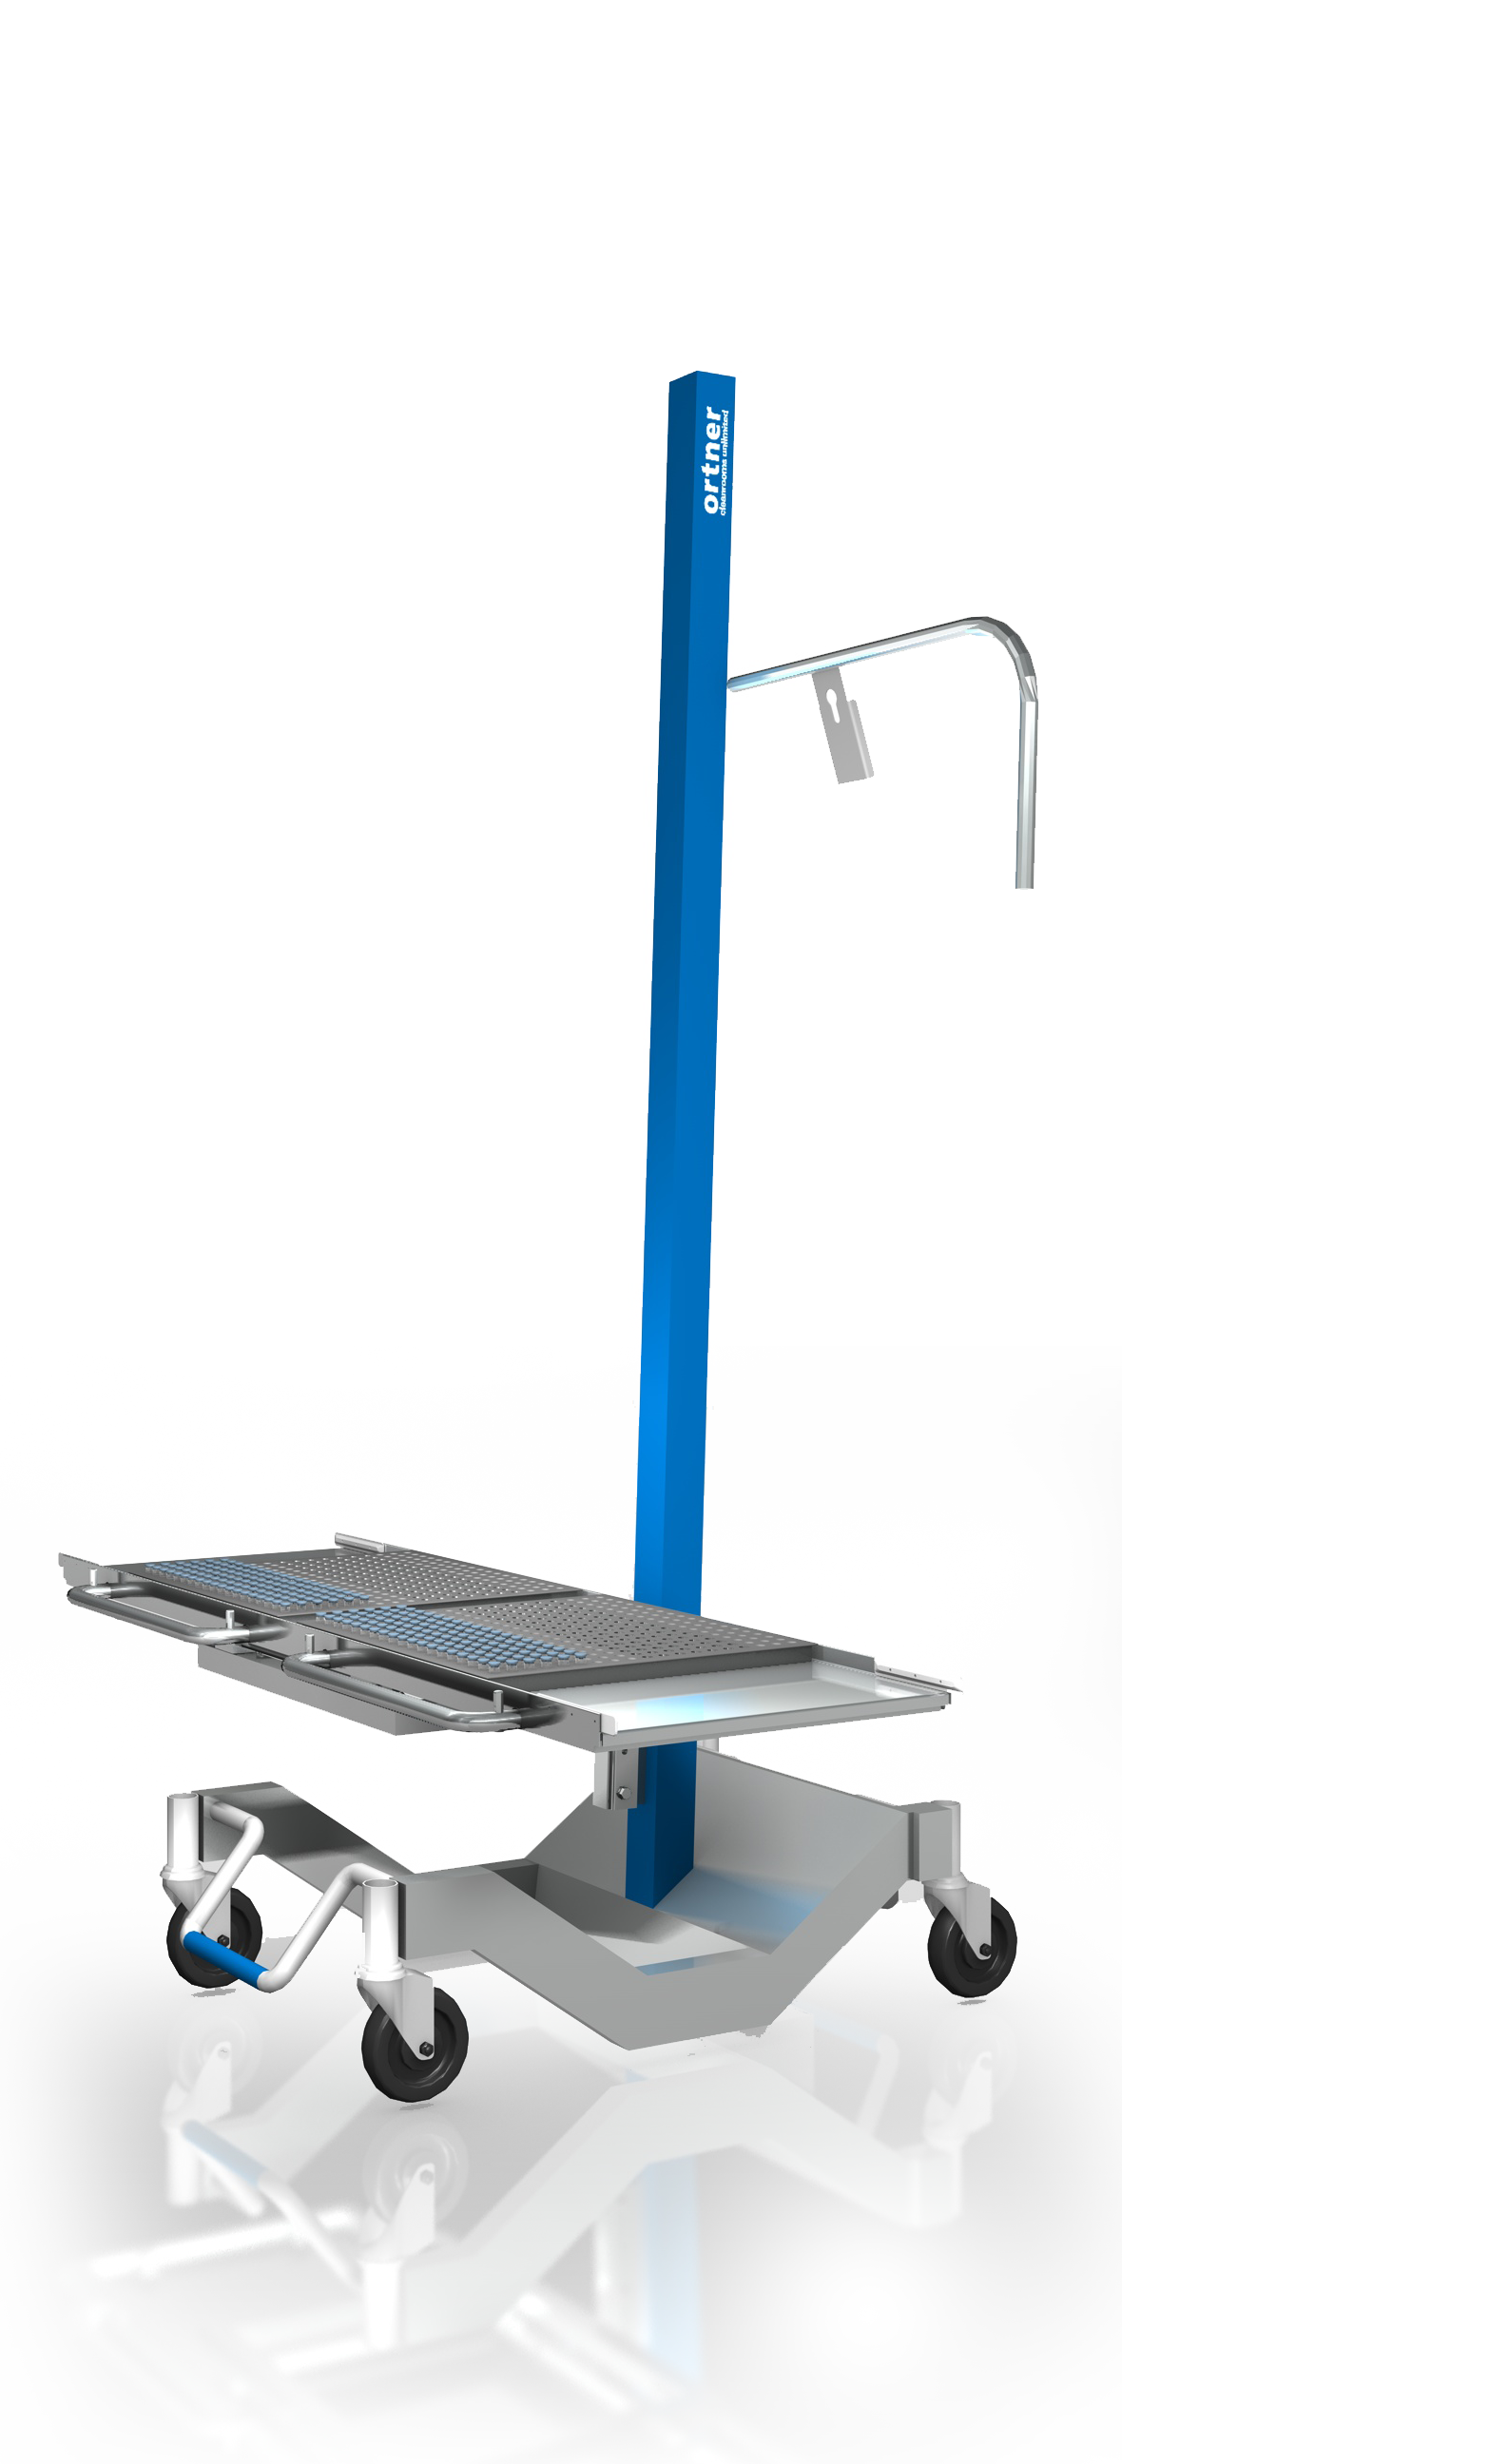 You can see the lower part of a blue bar, which is attached to a frame that is slightly bent upwards at the corners and has rollers. On the frame, which is opposite the blue bar, is a bracket that goes towards the ground. A bit above this frame is a horizontal plate attached to the bar. 